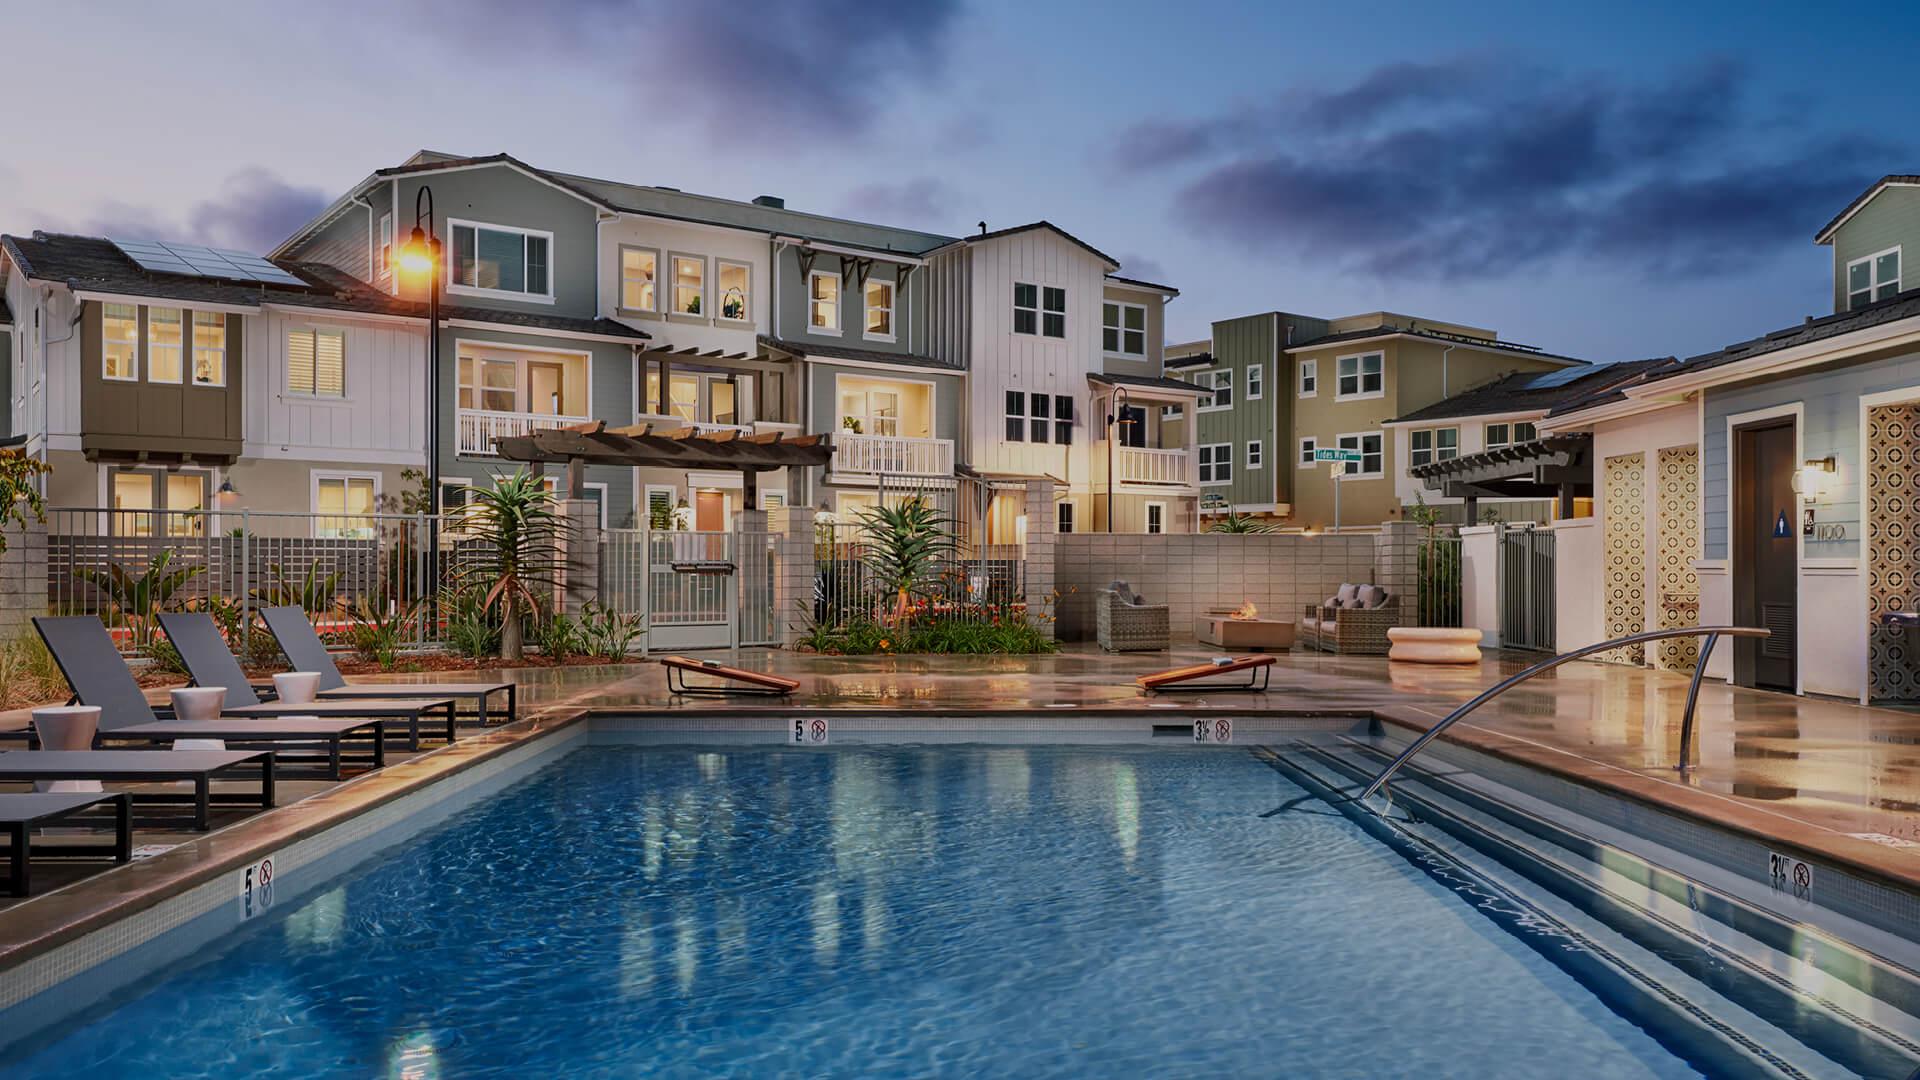 The exterior of a new Condo community with a pool.